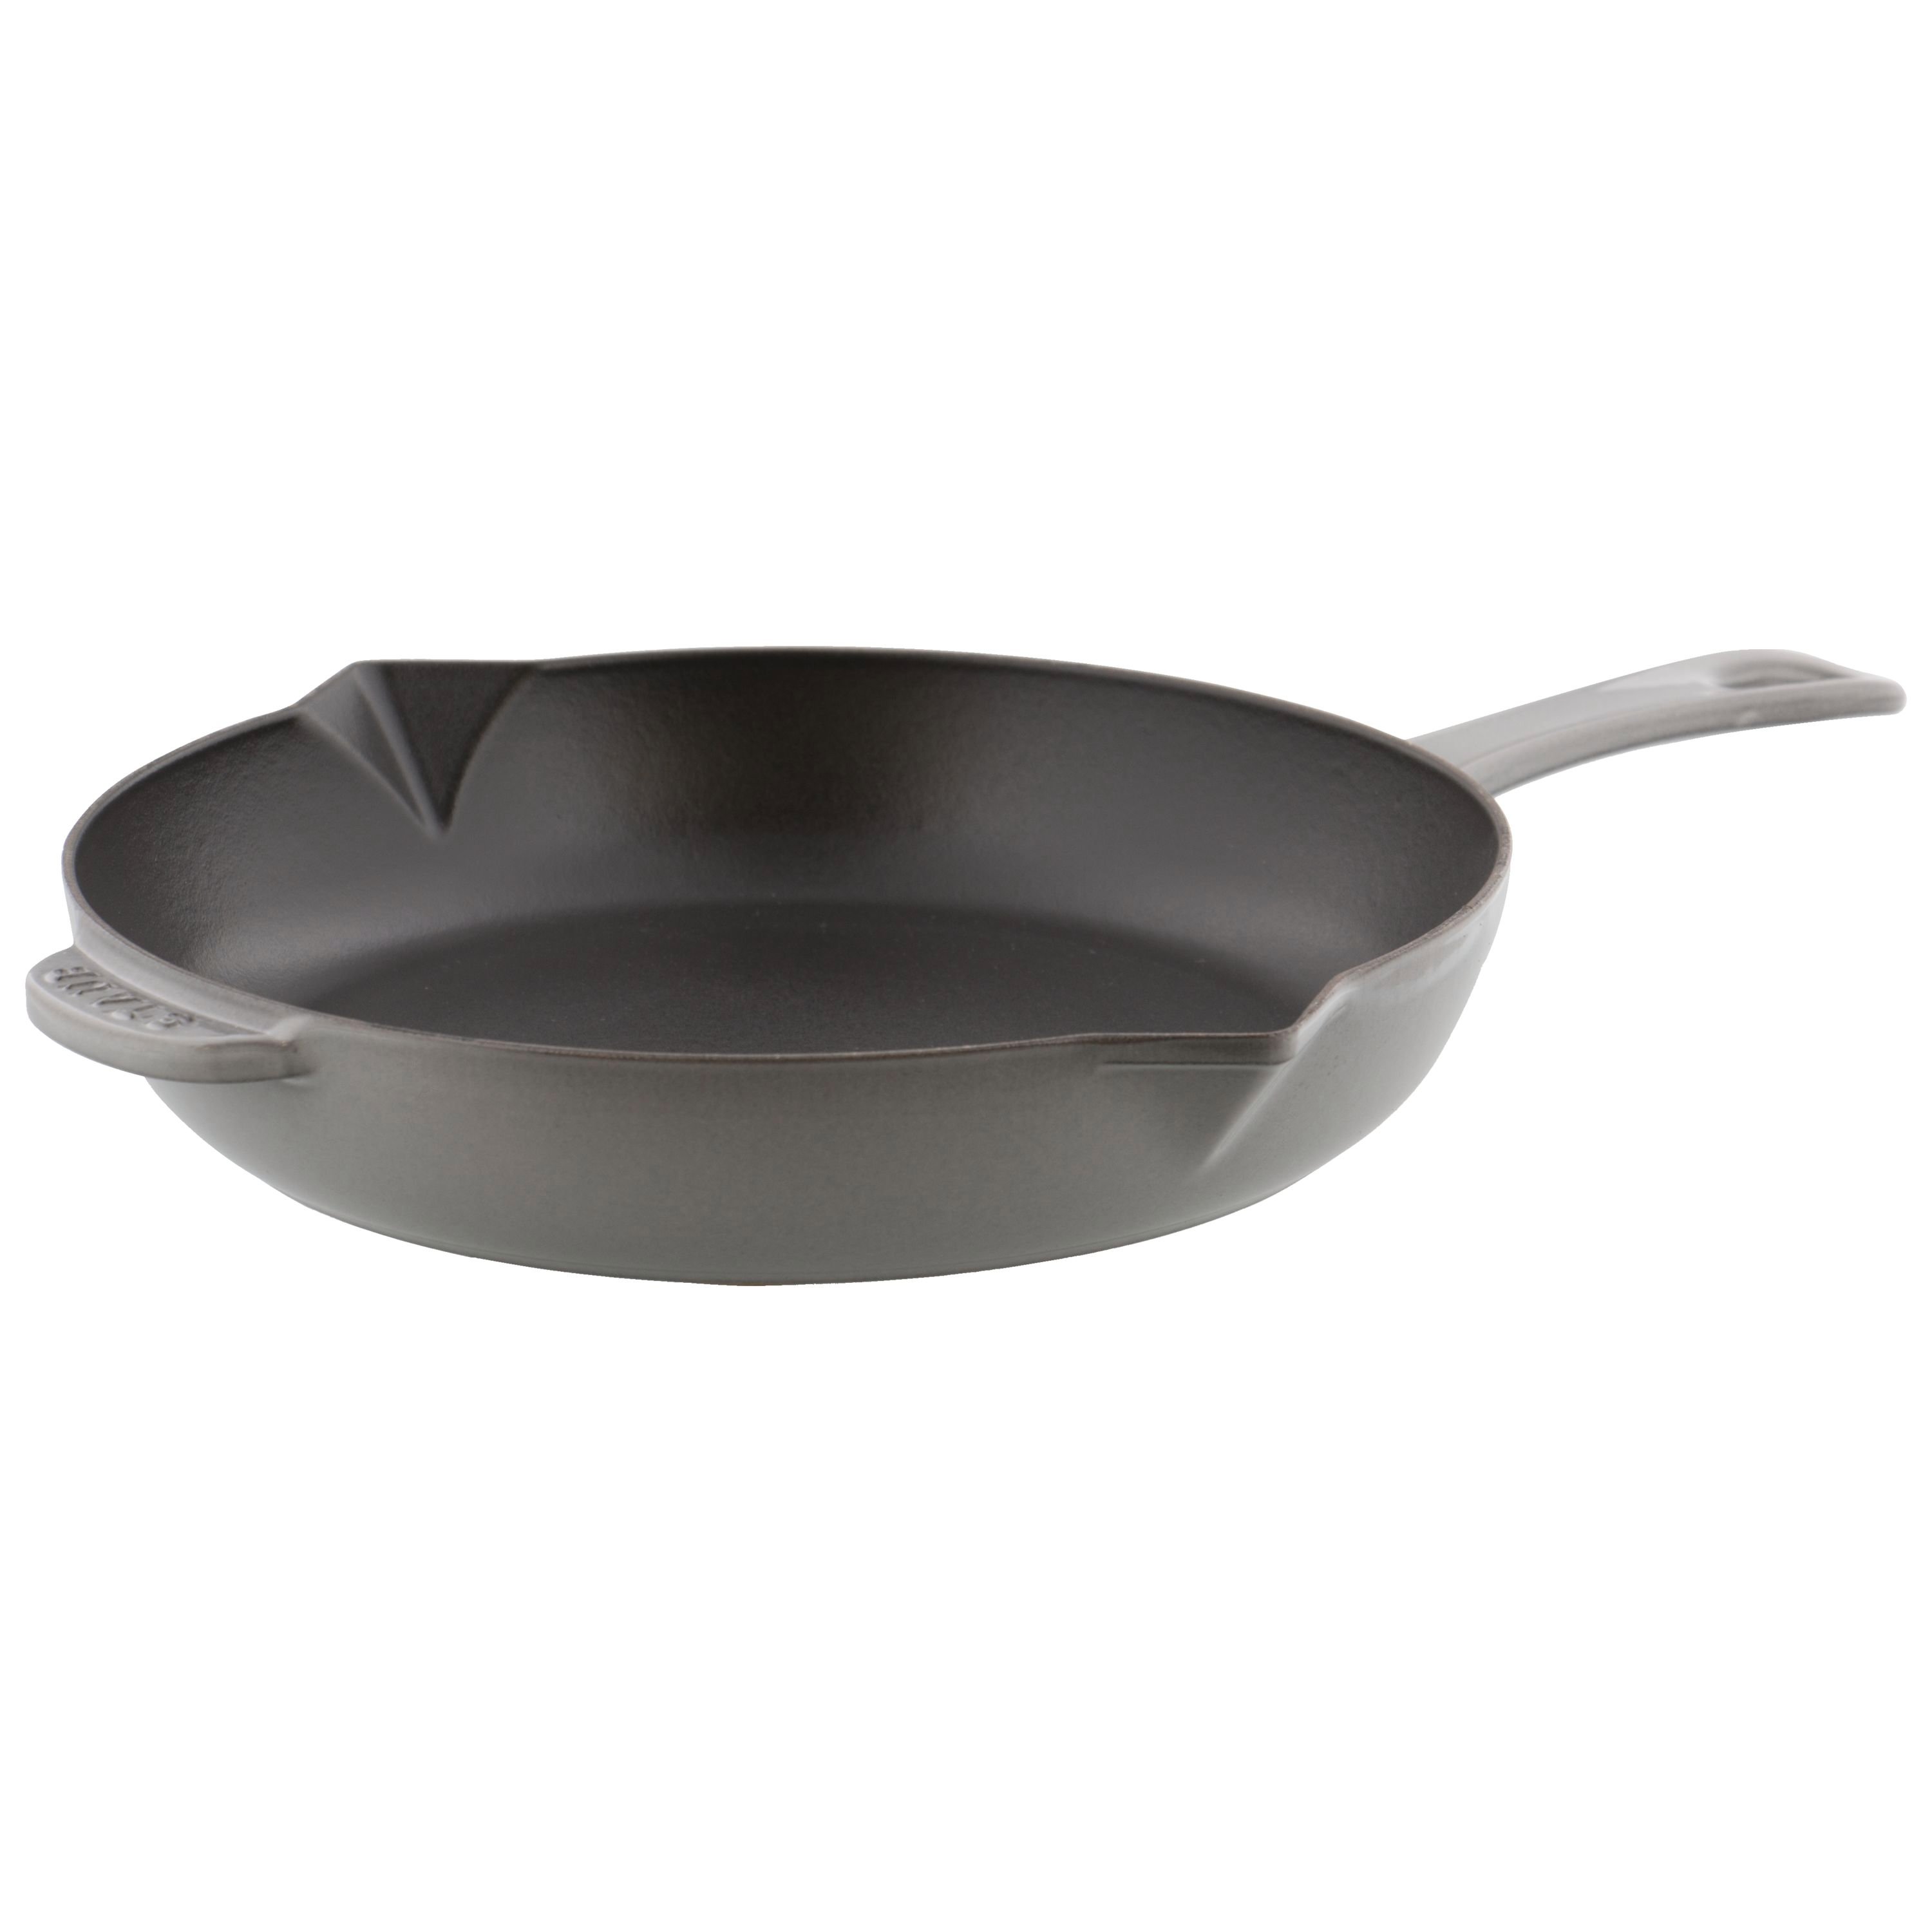 Victoria Cast Iron Skillet. Frying Pan With Long Handle 10 for sale online